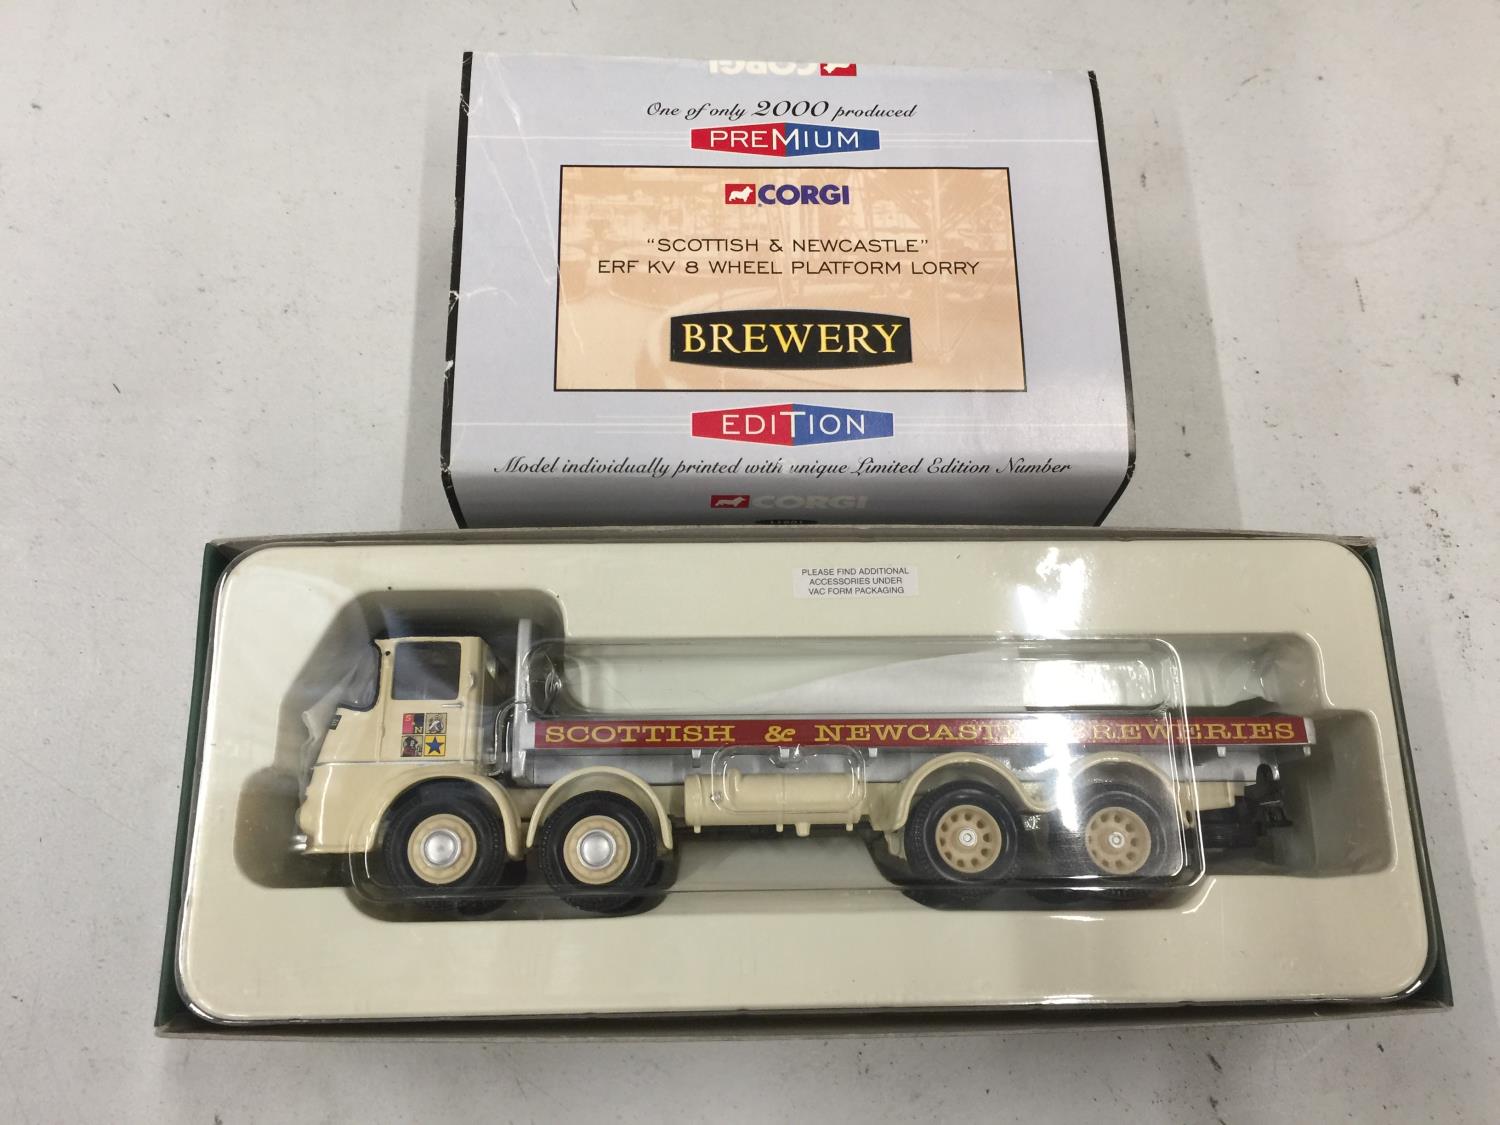 A BOXED LIMITED EDITION CORGI 11800 SCOTTISH AND NEWCASTLE MODEL LORRY